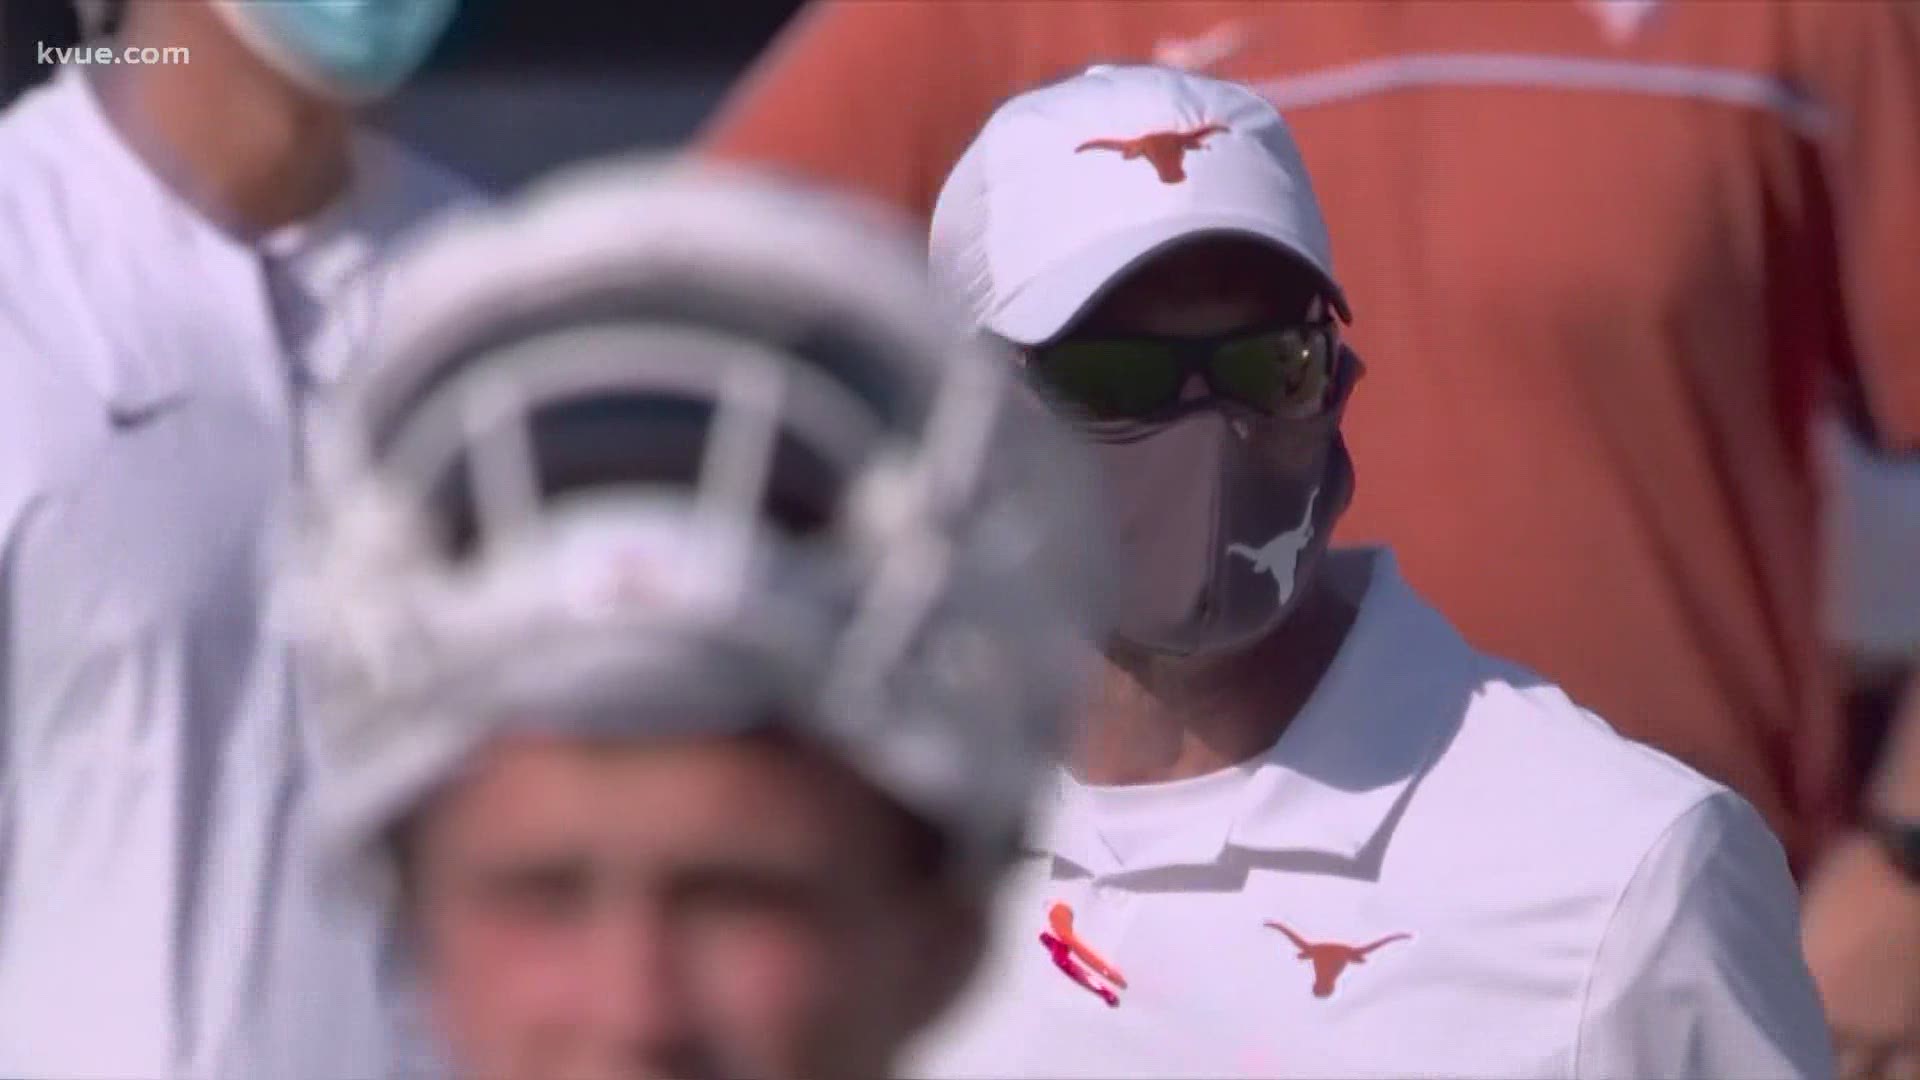 UT's athletic director has put an end to speculation about Head Football Coach Tom Herman.